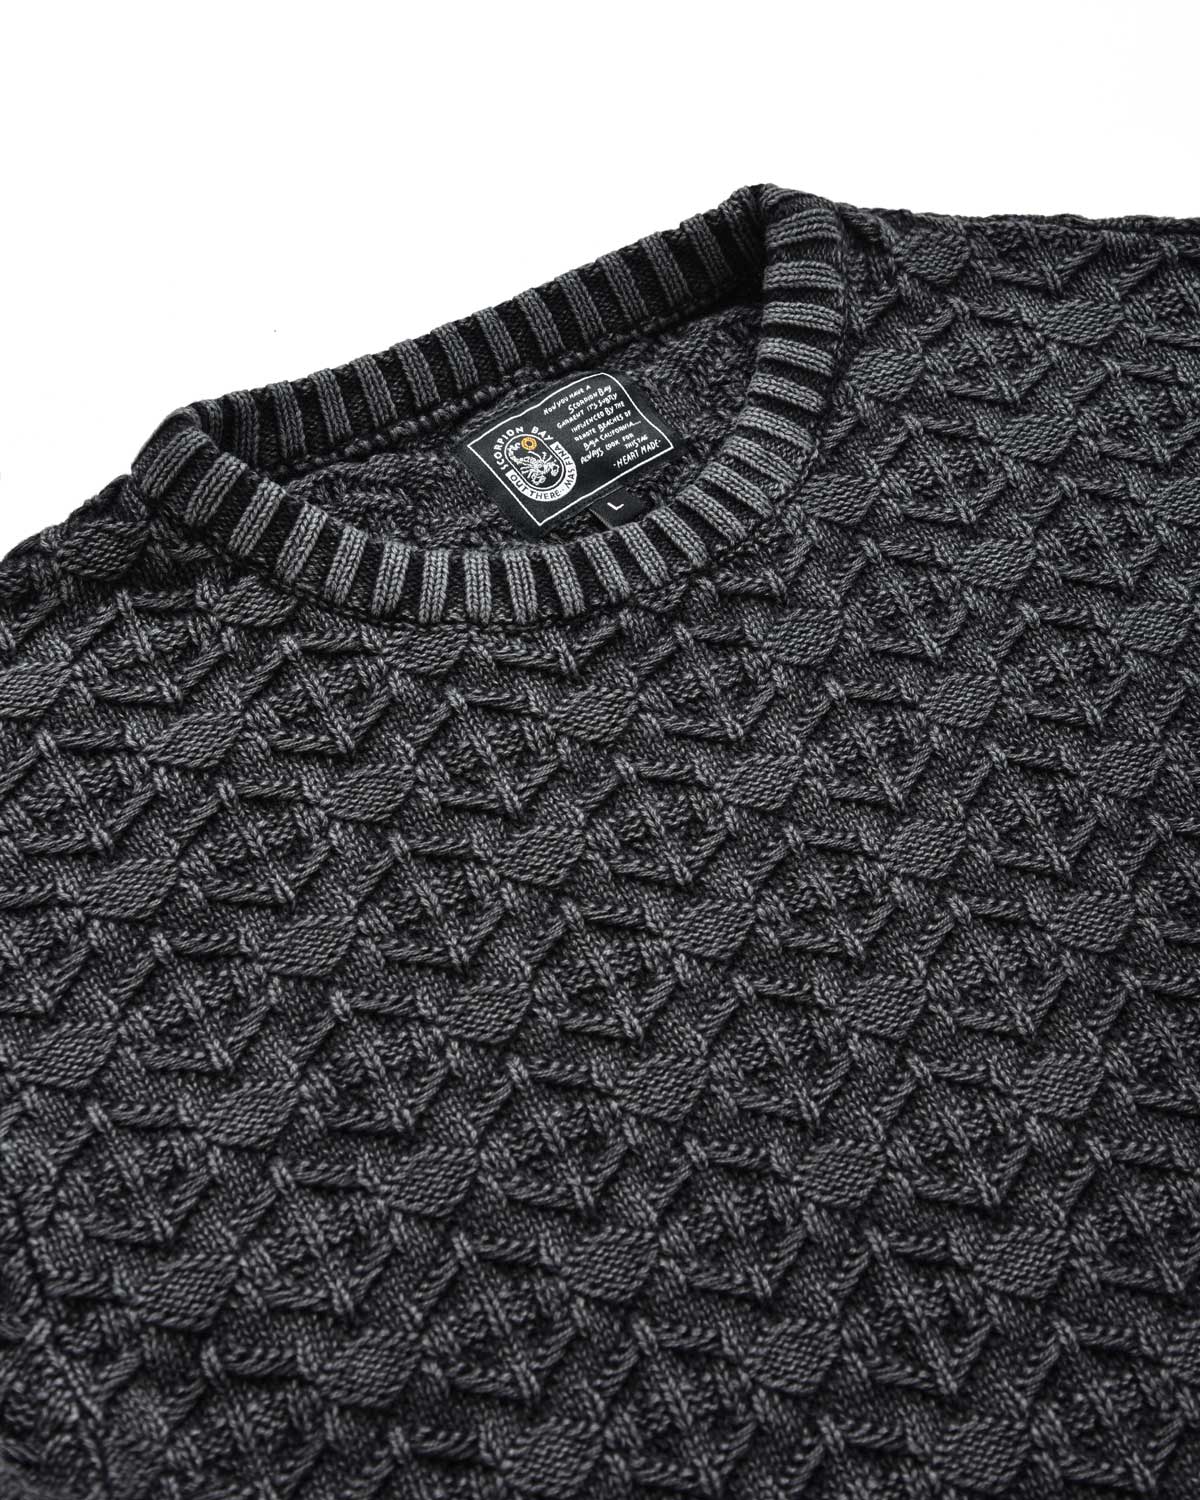 Man | Embroidered pullover in 100% charcoal cotton